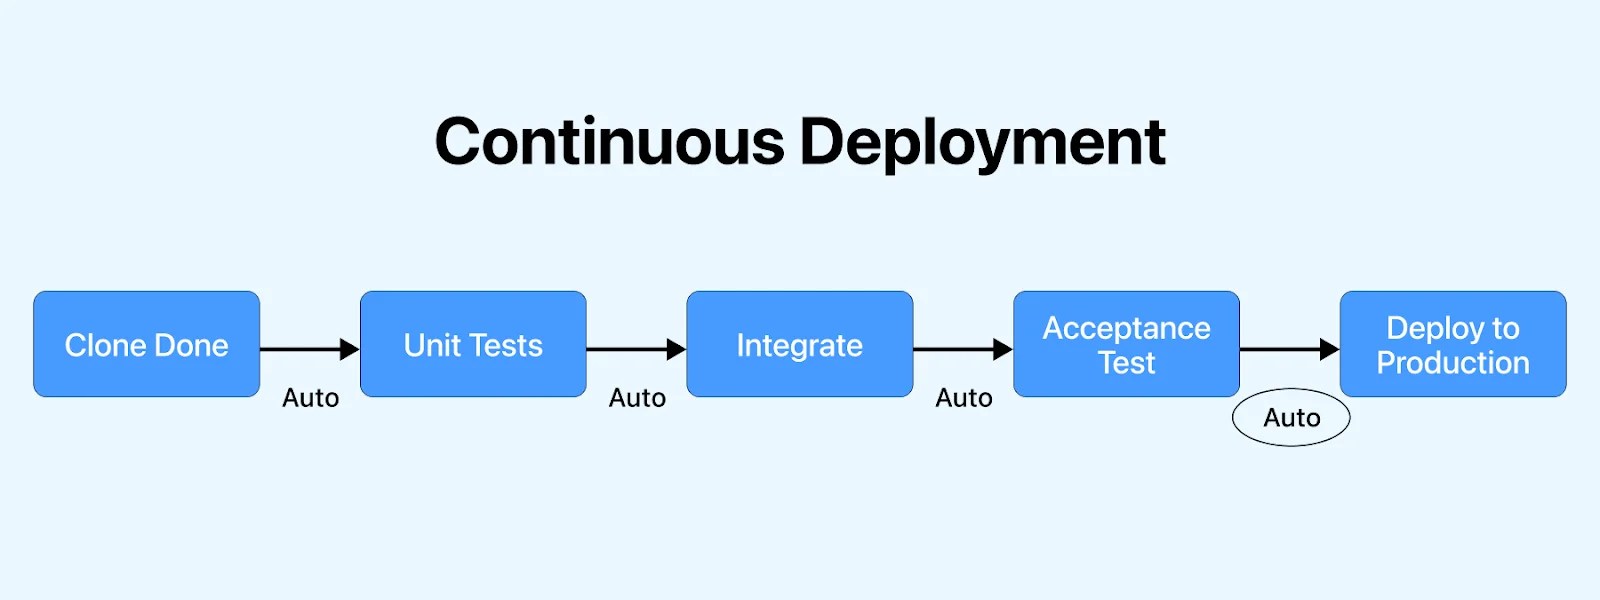 deployment process performing CI/CD testing is crucial